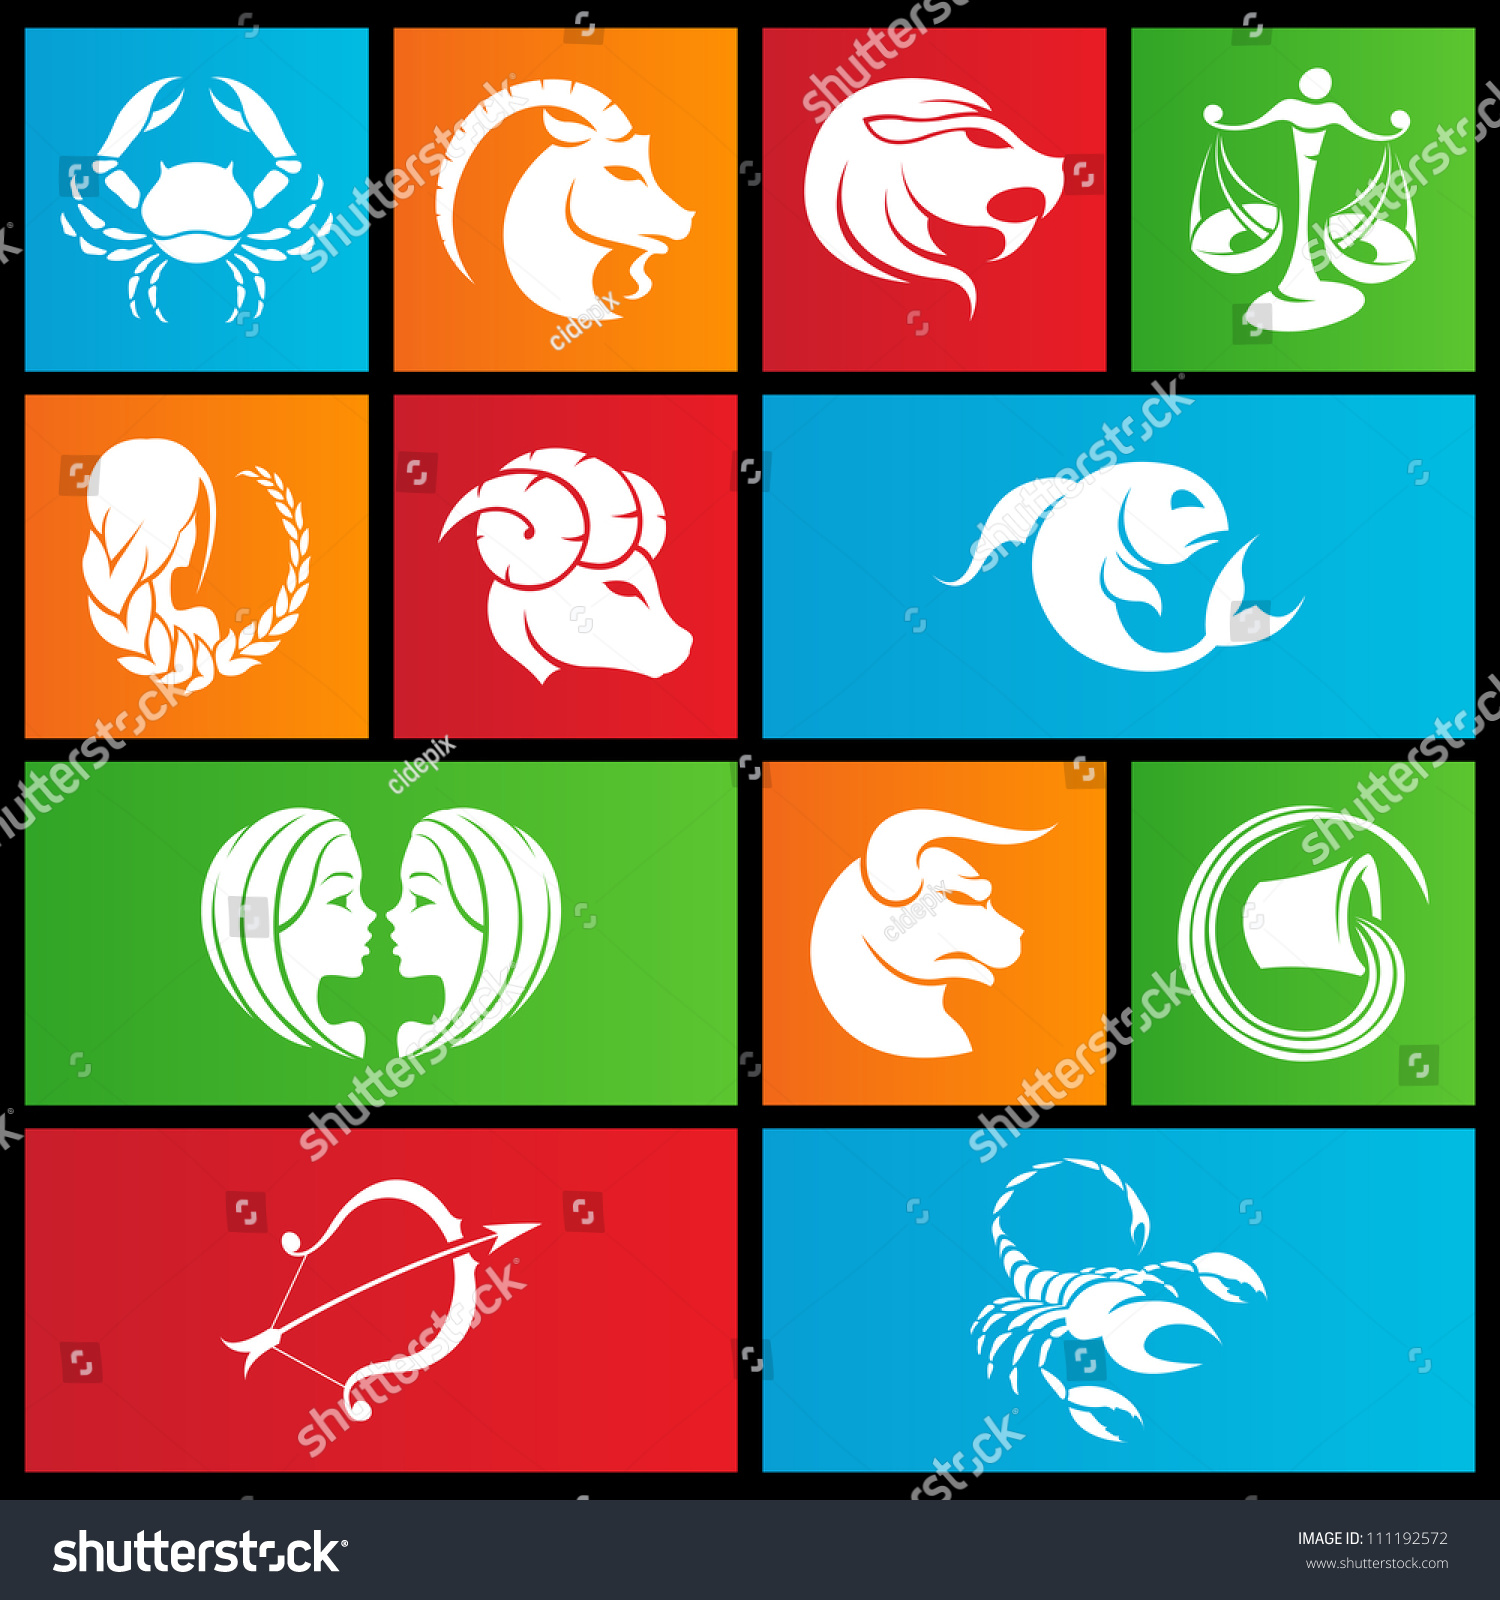 SVG of vector illustration of metro style zodiac star signs svg